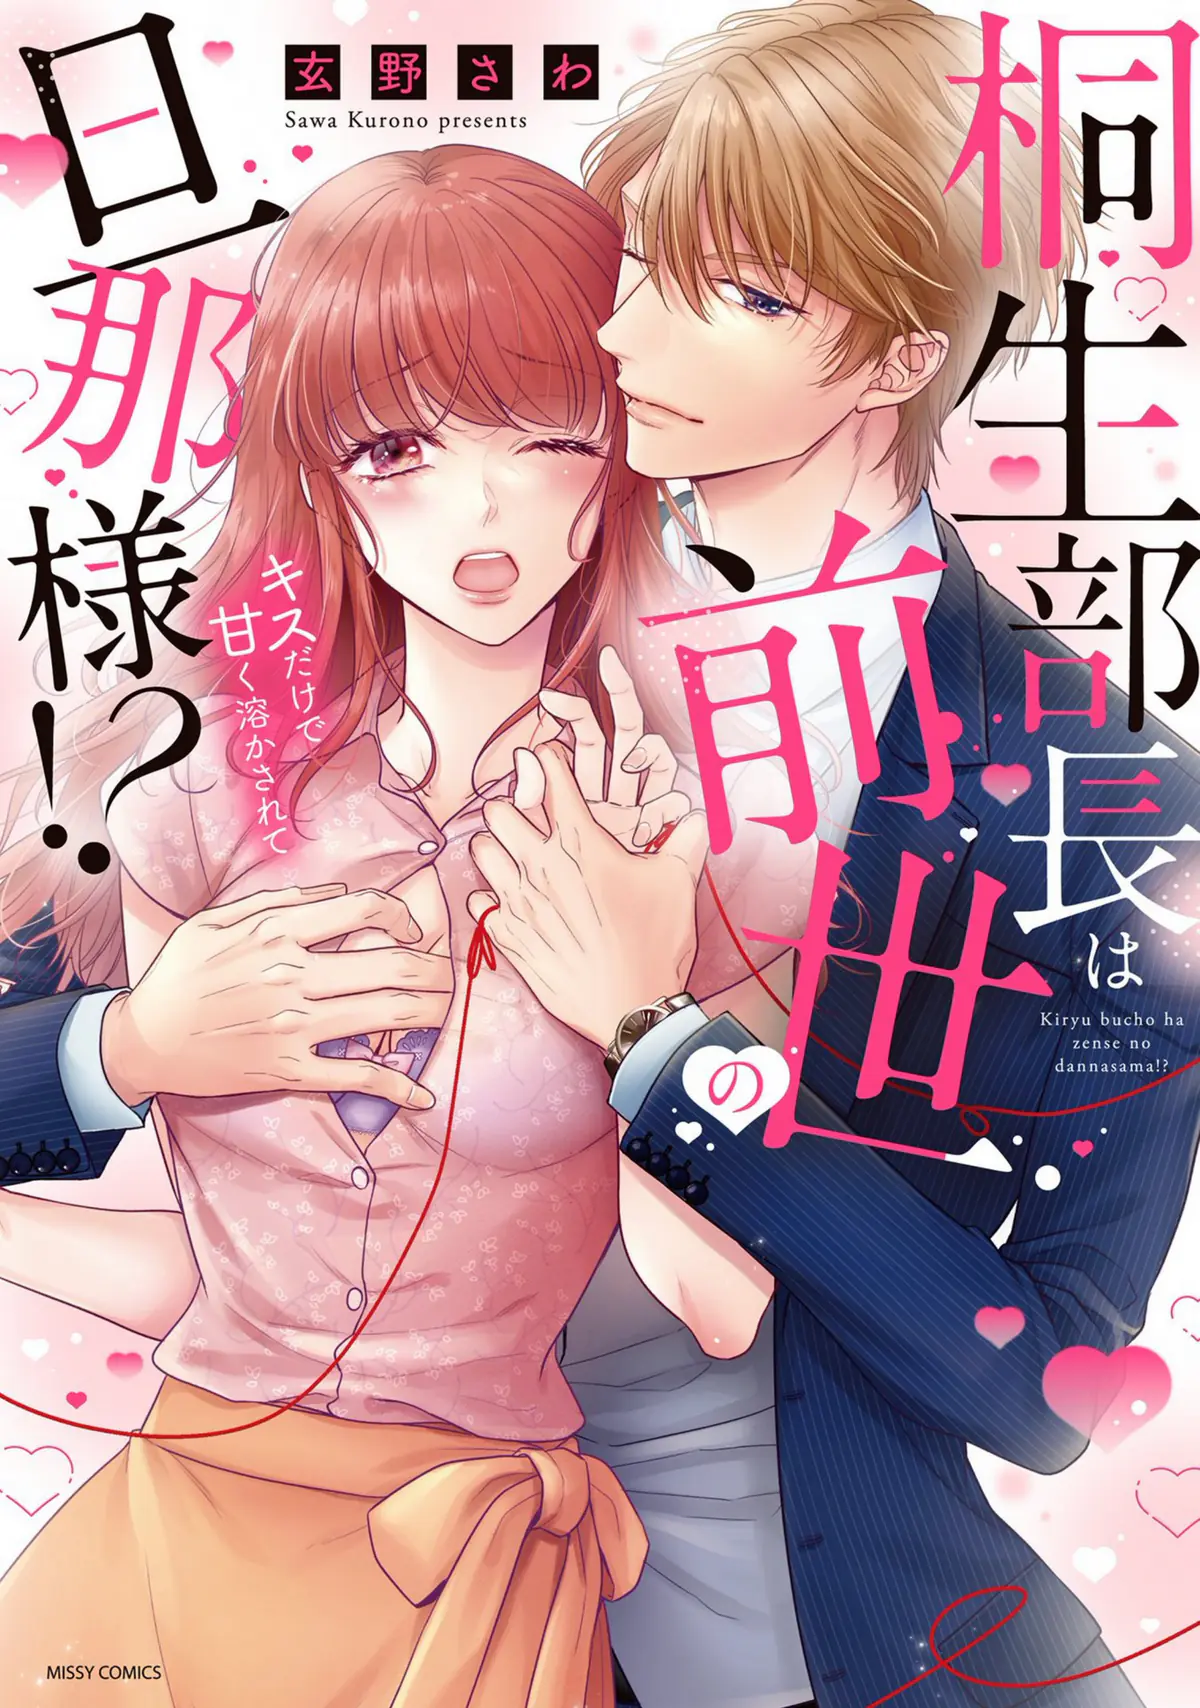 4 Steamy Romance Manga for Valentine's Day: Chief Kiryu Was My Husband in a Past Life!? Coming Undone So Sweetly From a Kiss